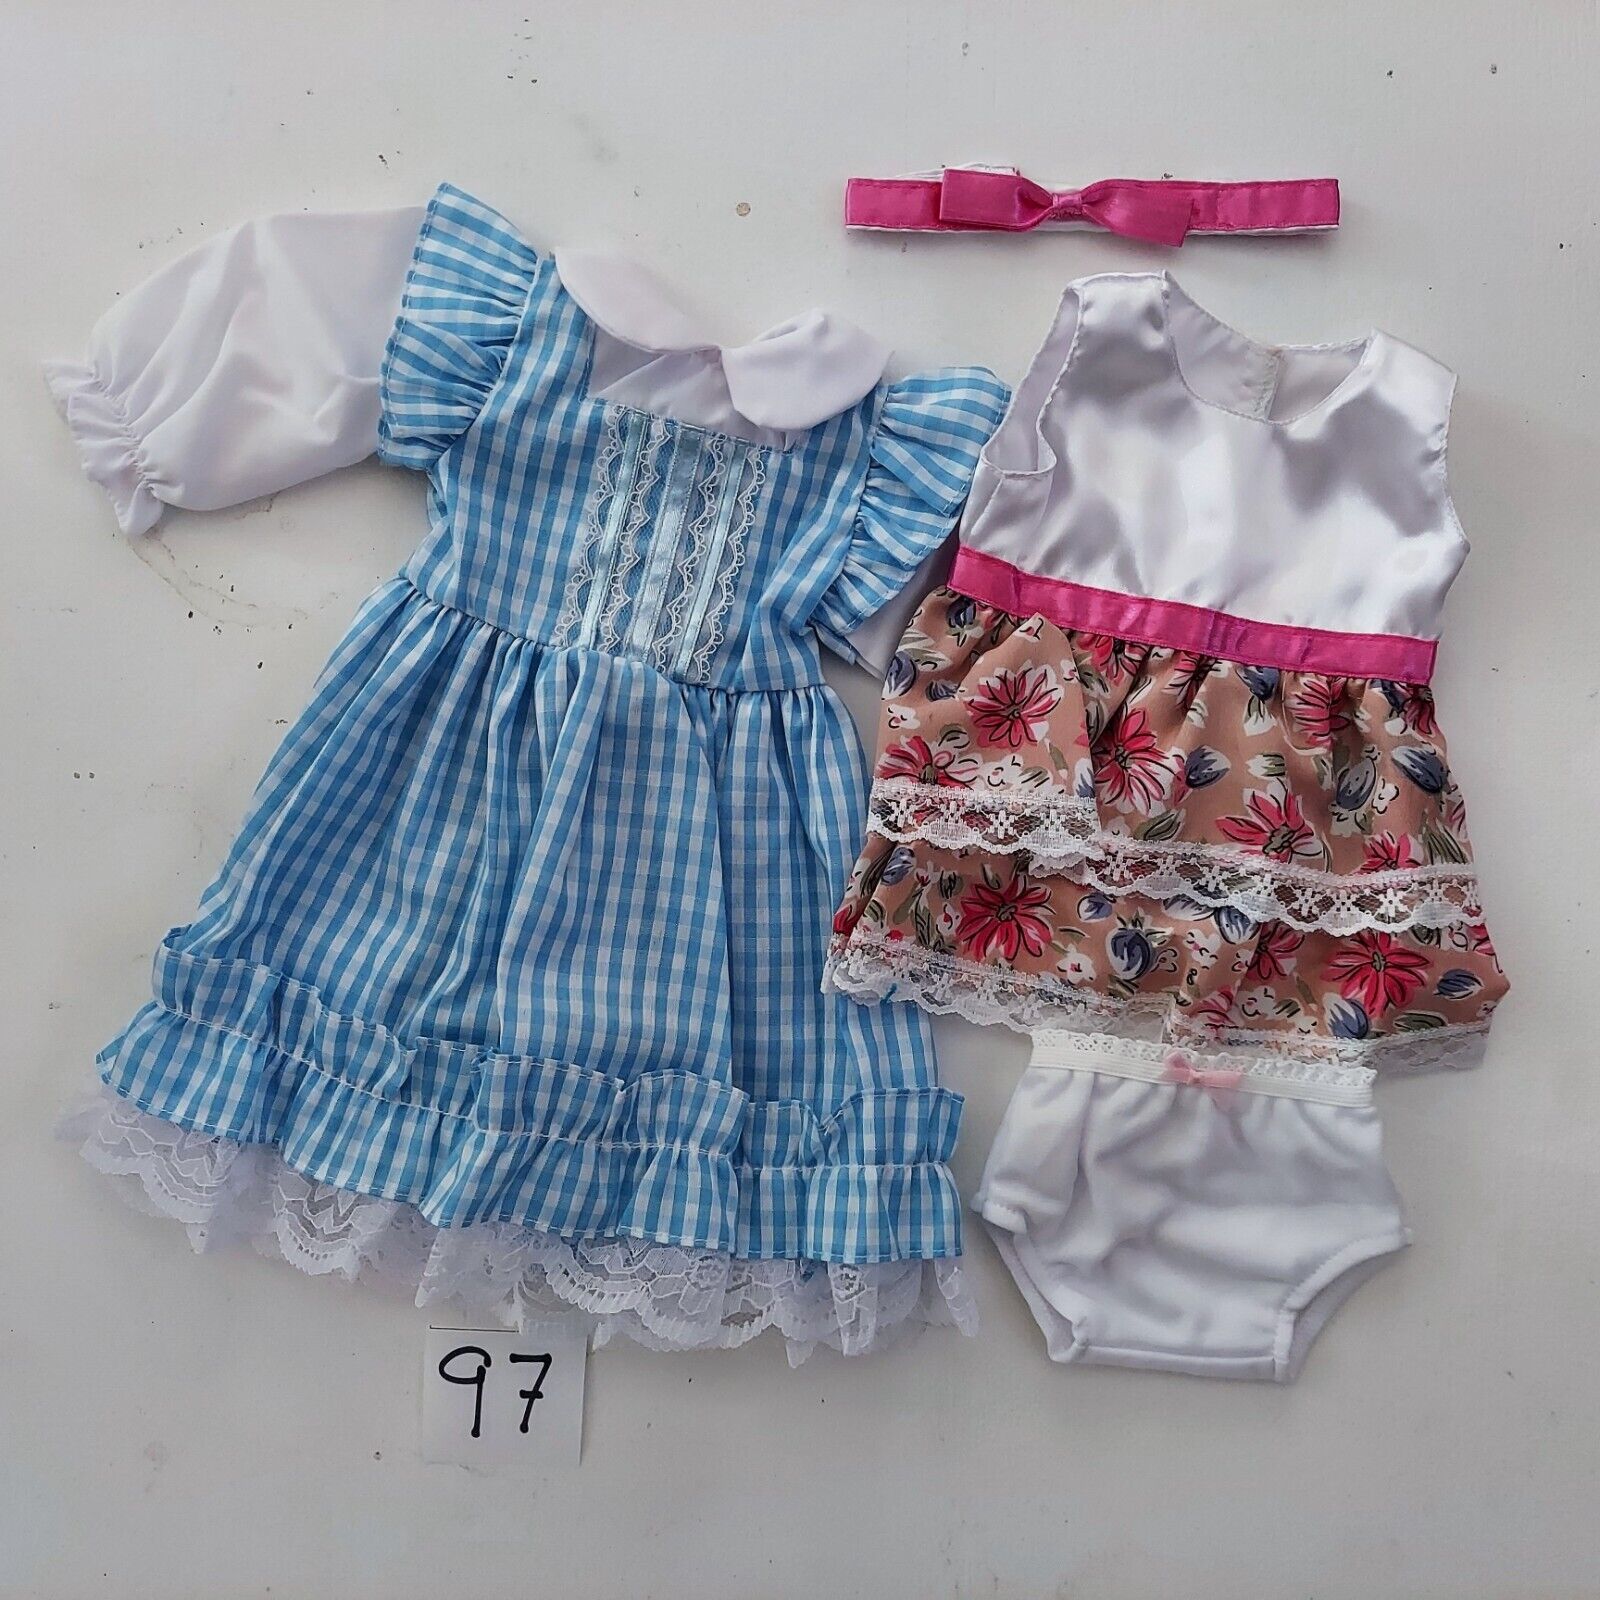  Doll Clothes #97 fits 18inch American Girl Lot american doll clothing does not apply